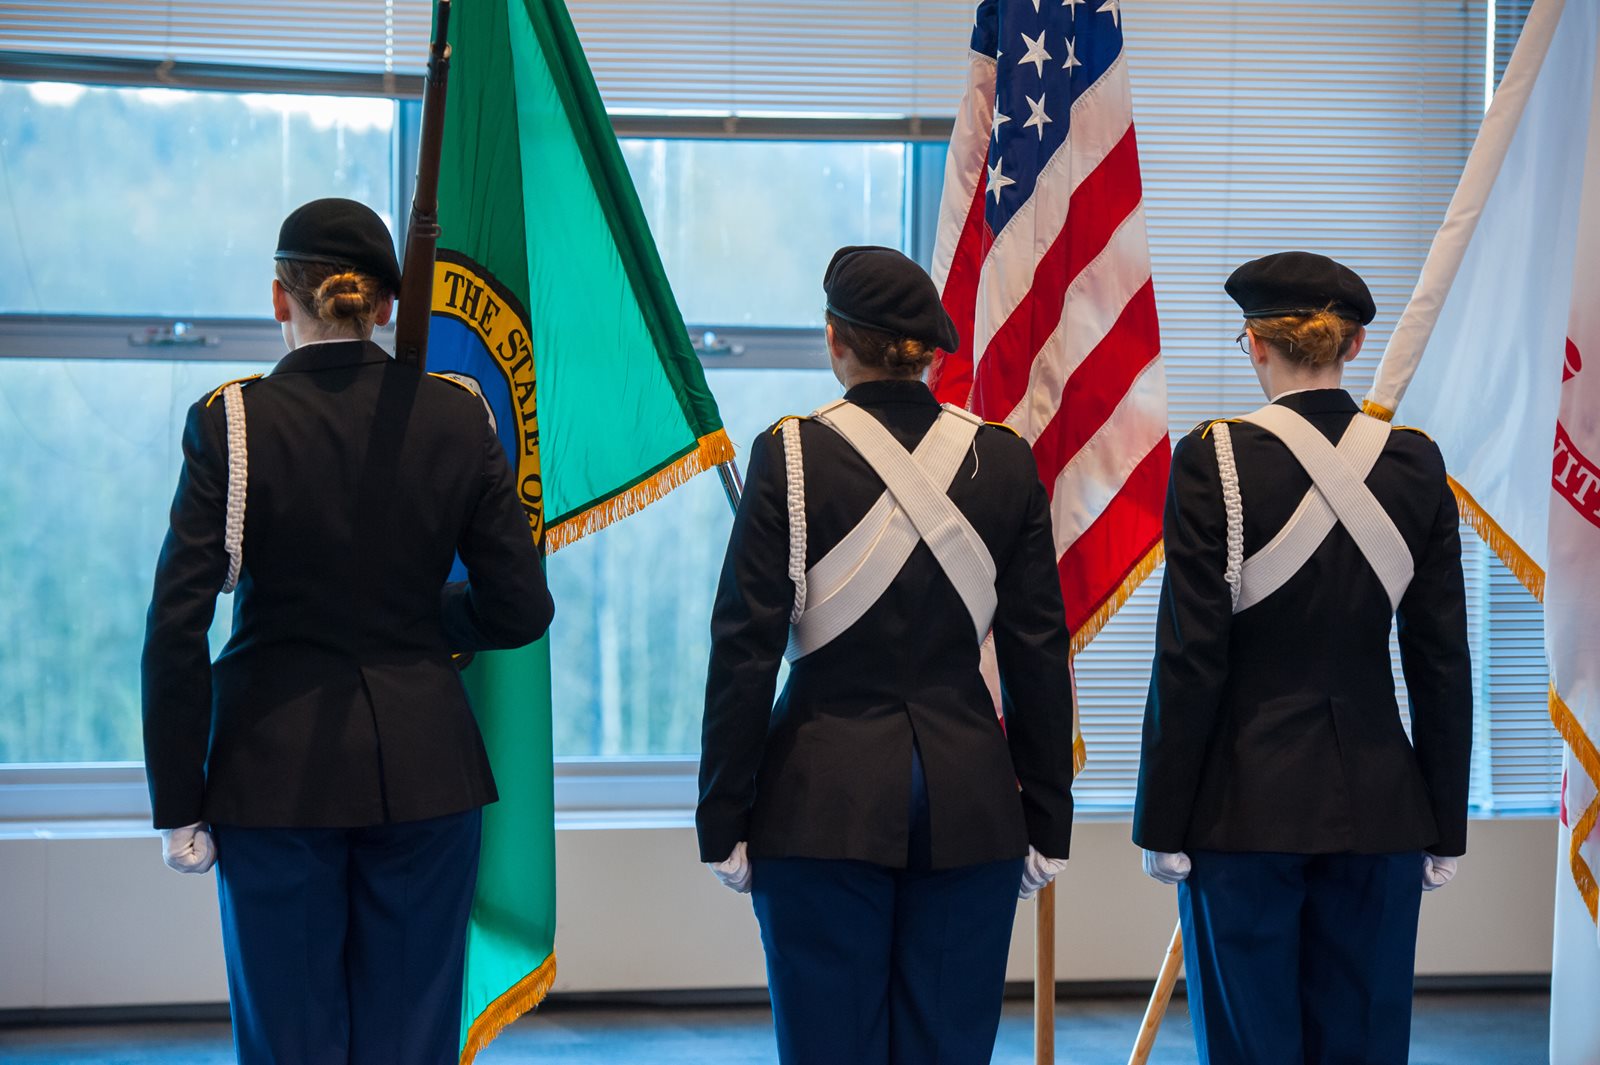 honor guard with flags